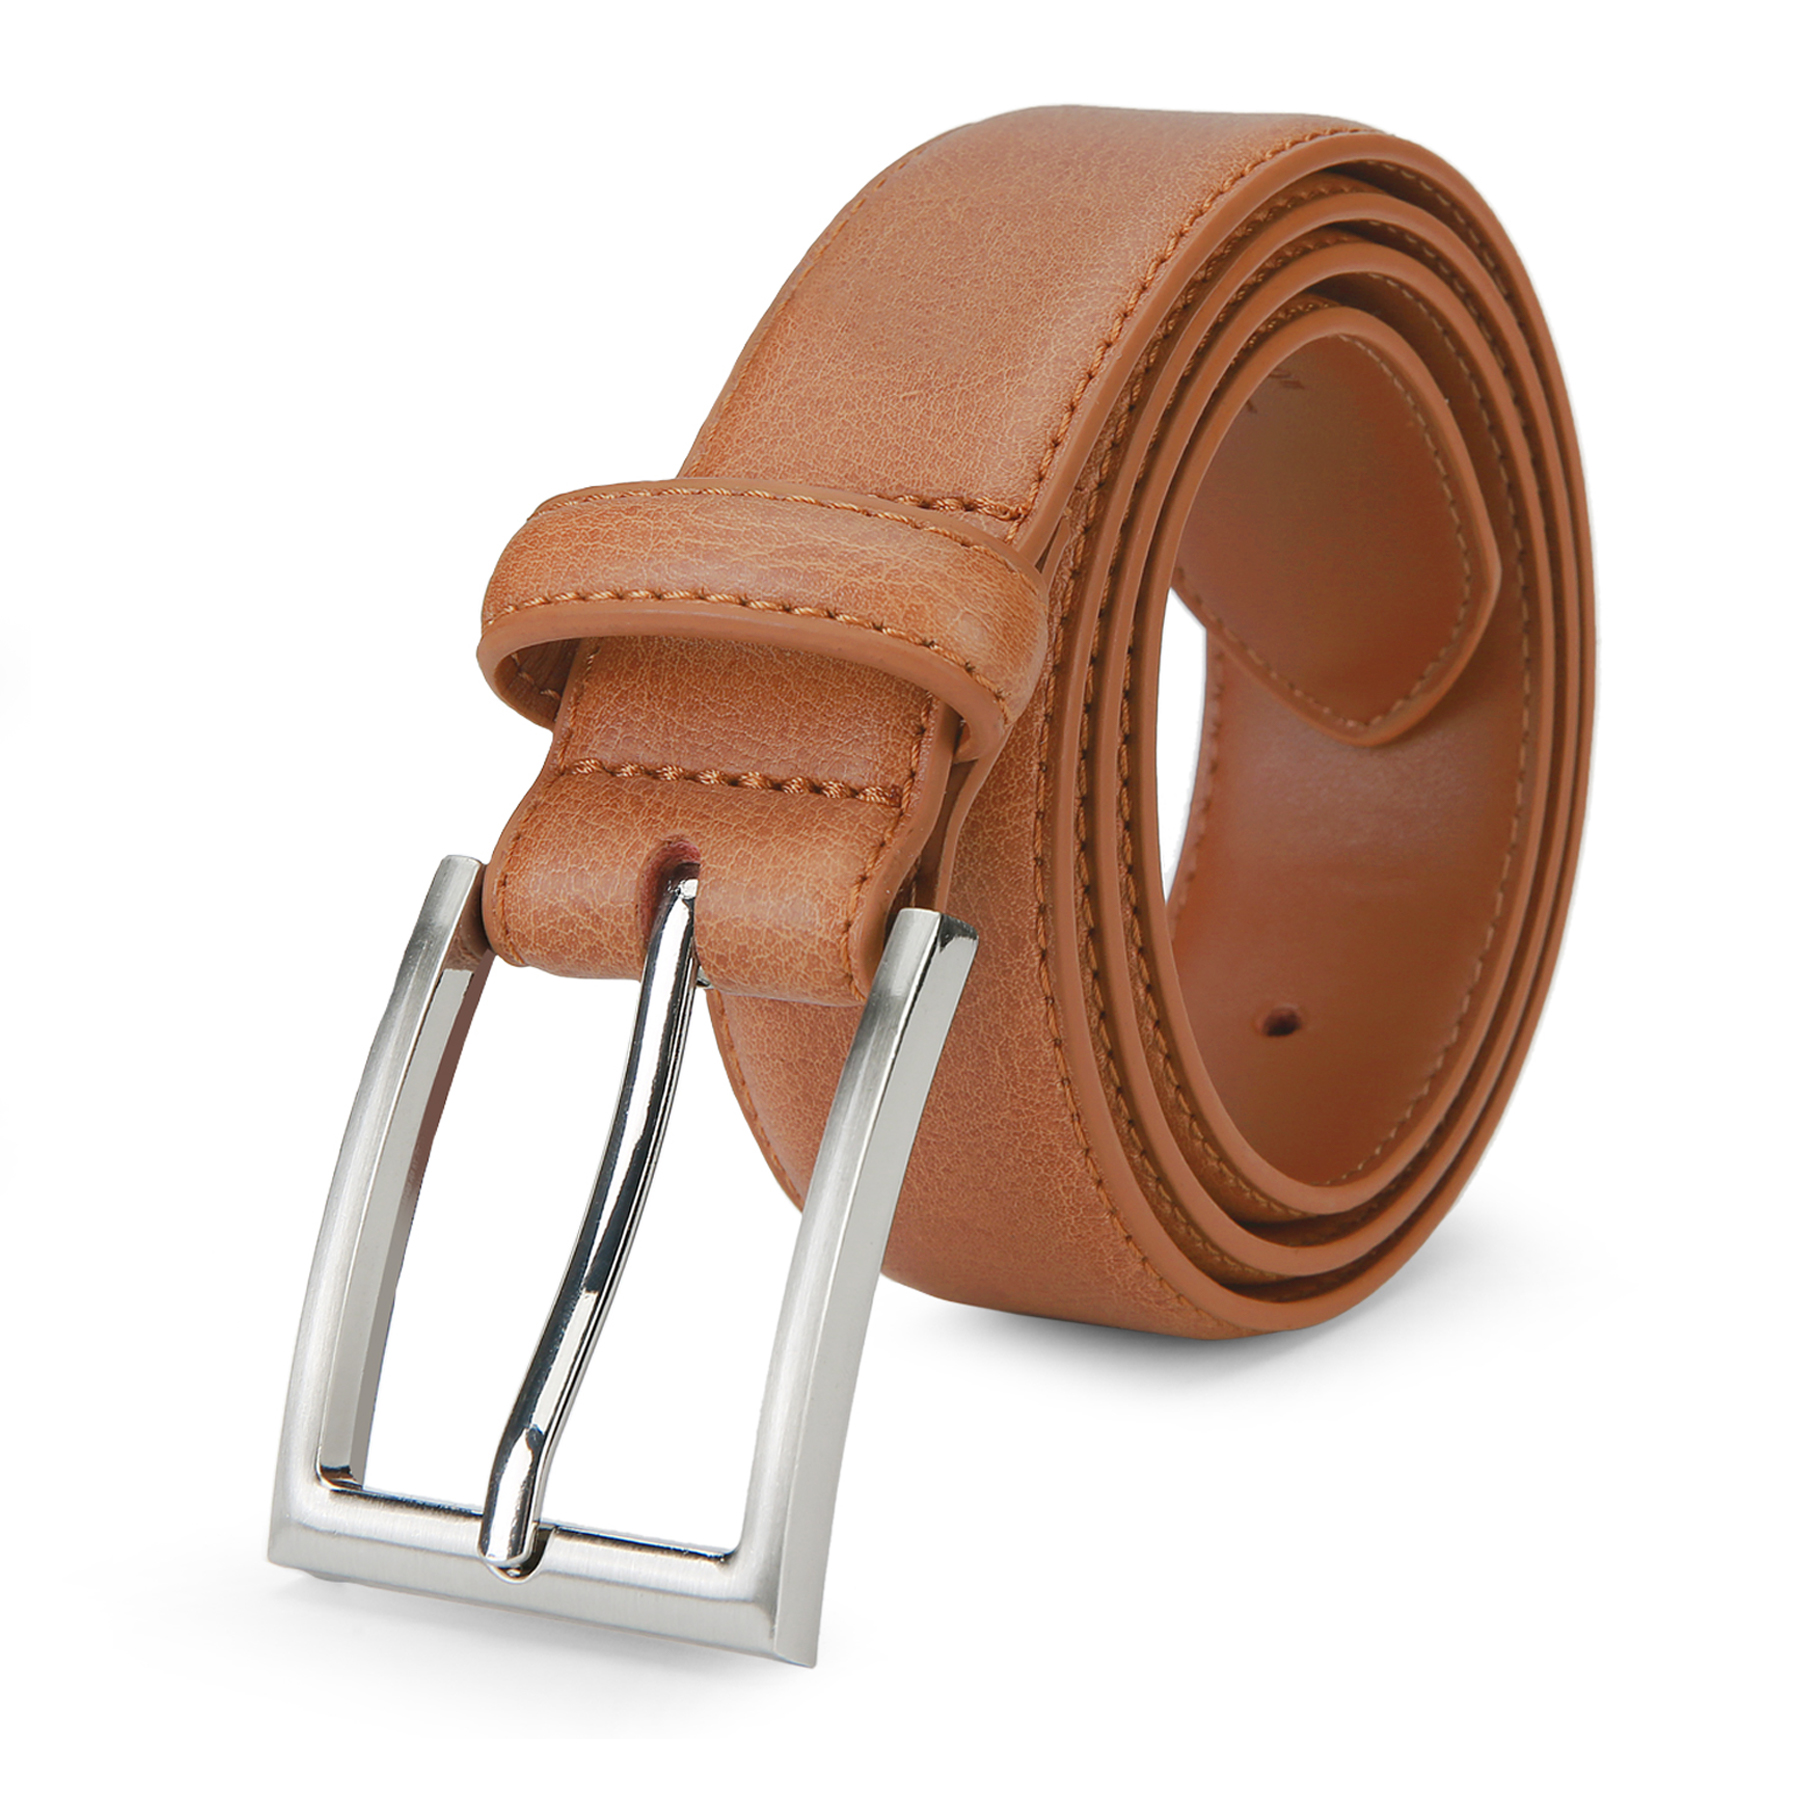 Mens Genuine Leather Belt Fashion Classic Casual Belt With Single